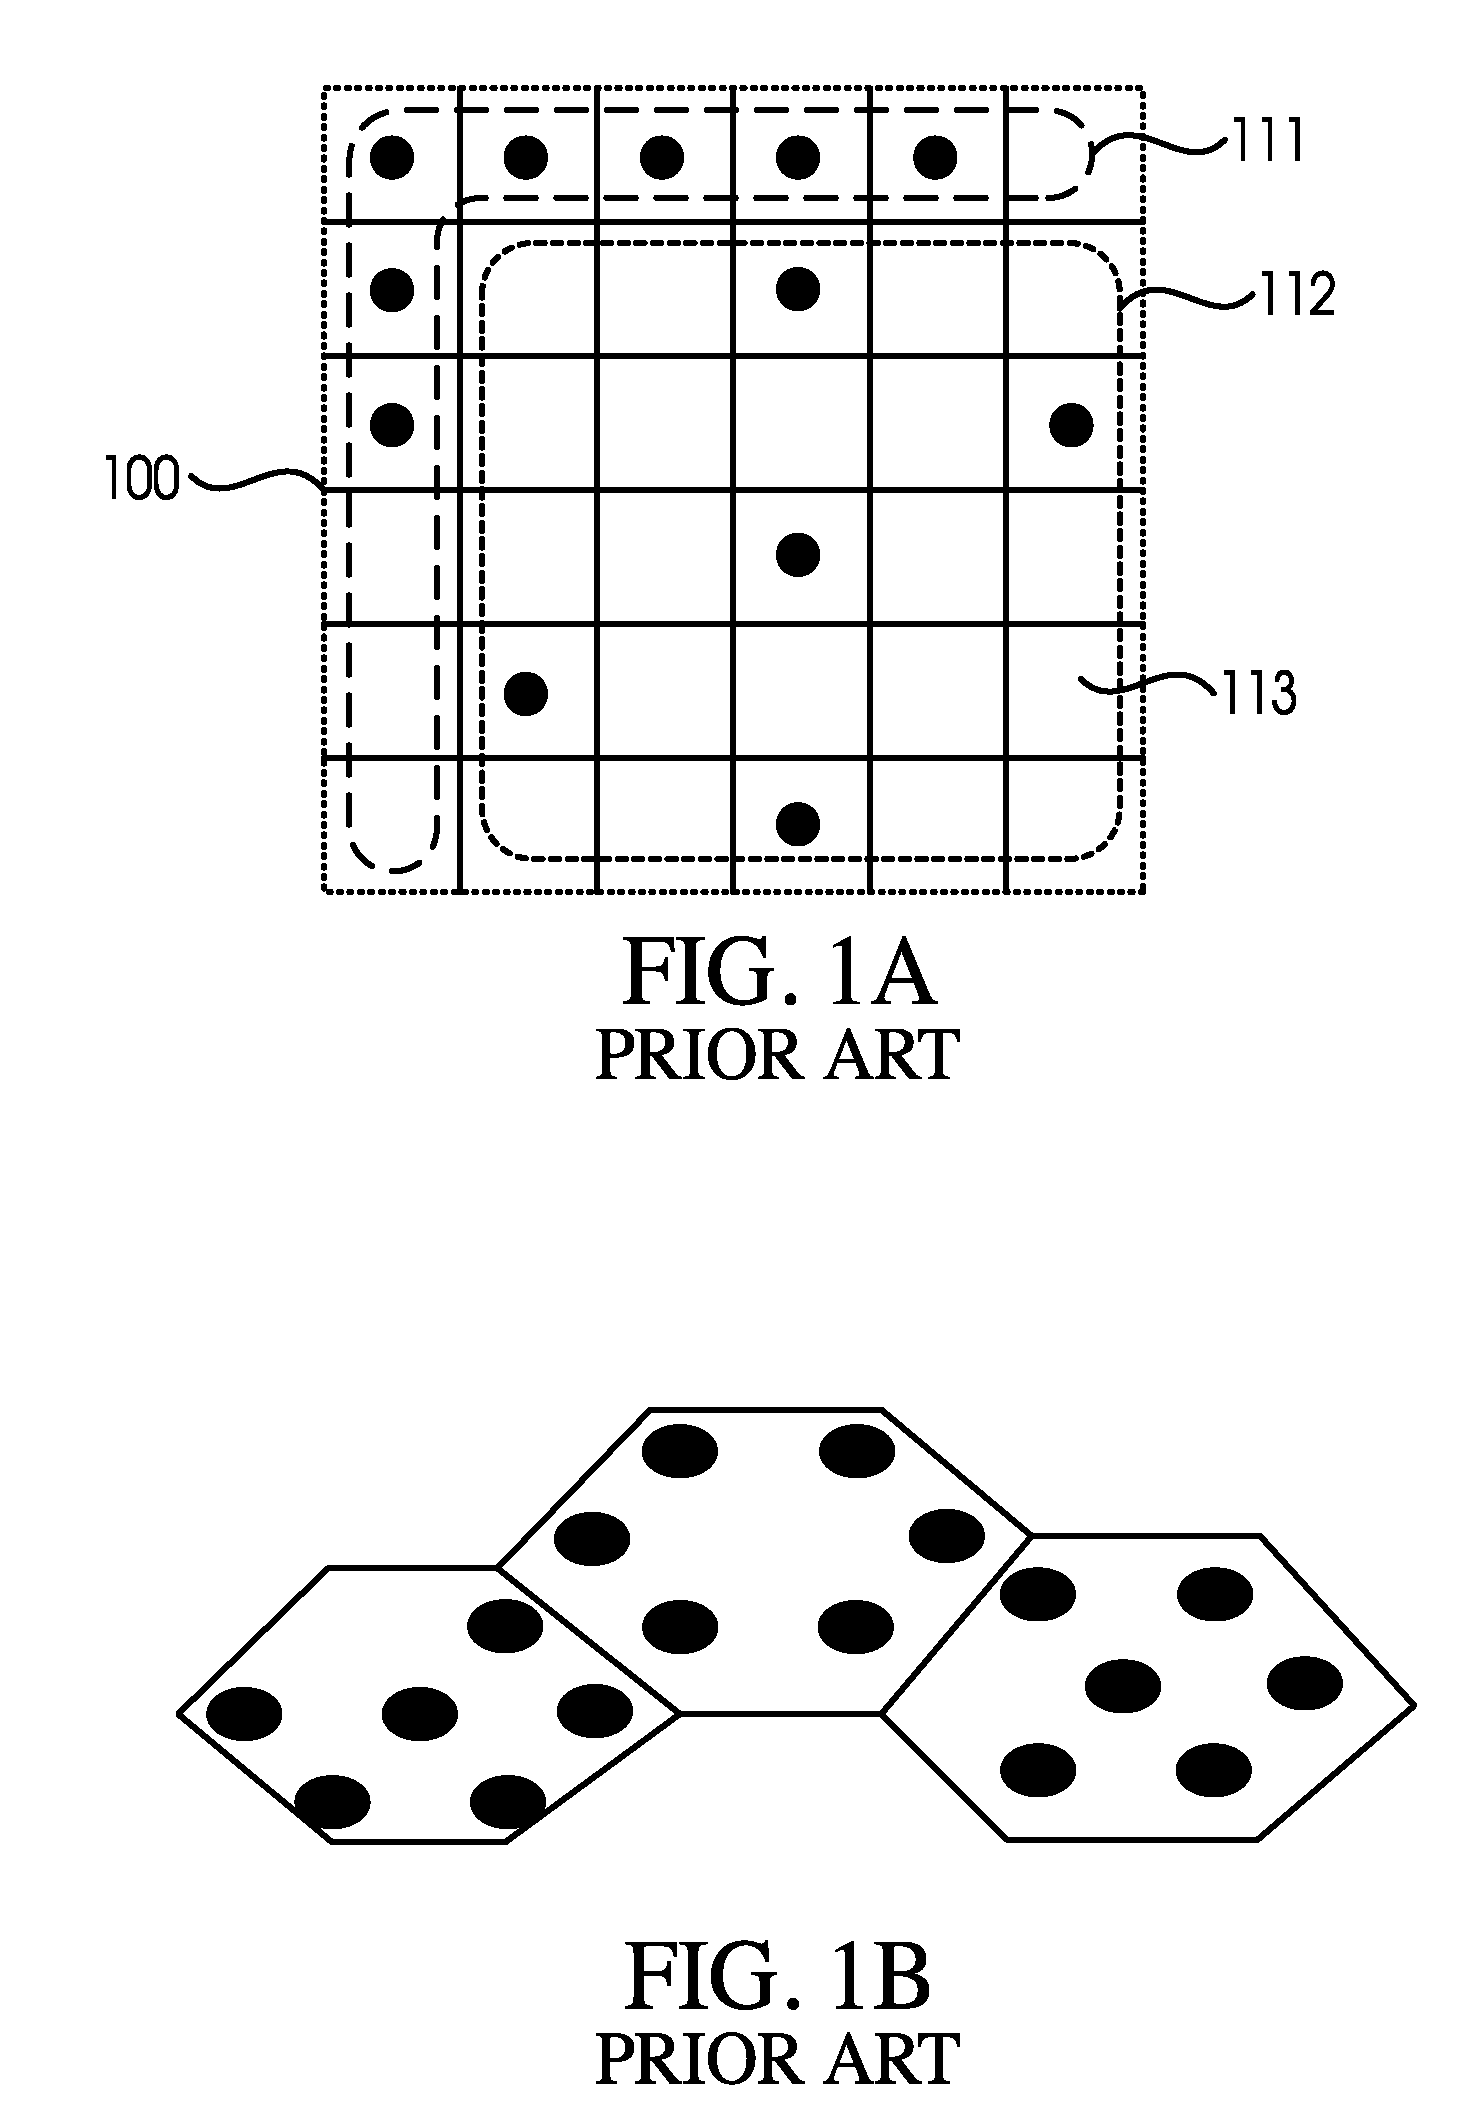 Method and System for Encoding and Decoding Data